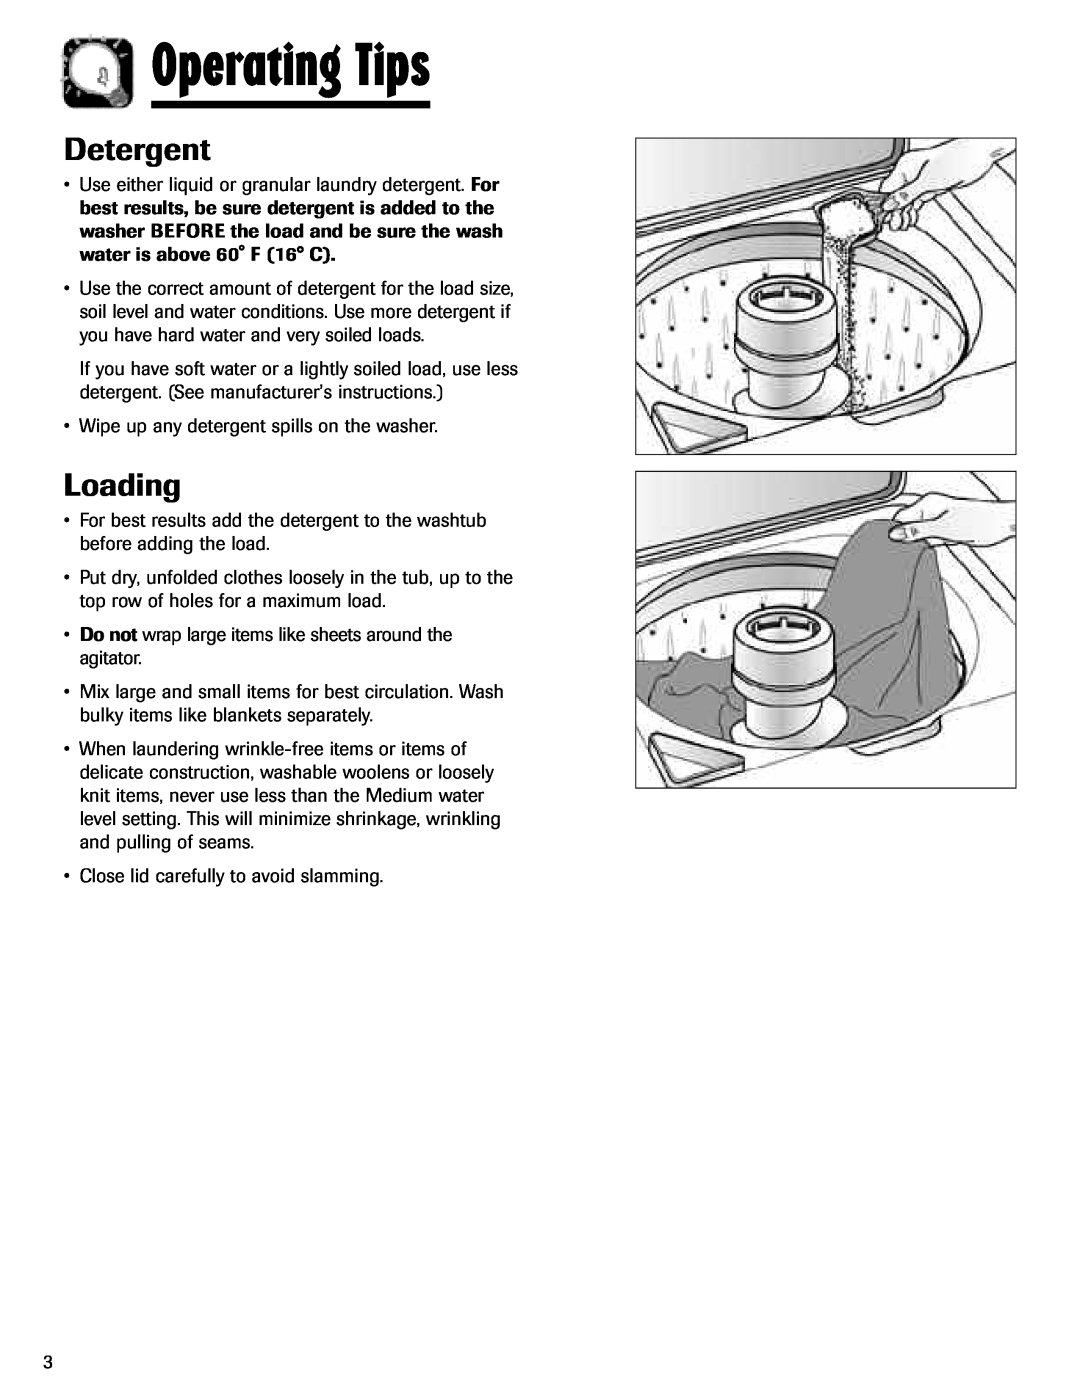 Maytag MAV-3 important safety instructions Operating Tips, Detergent, Loading 